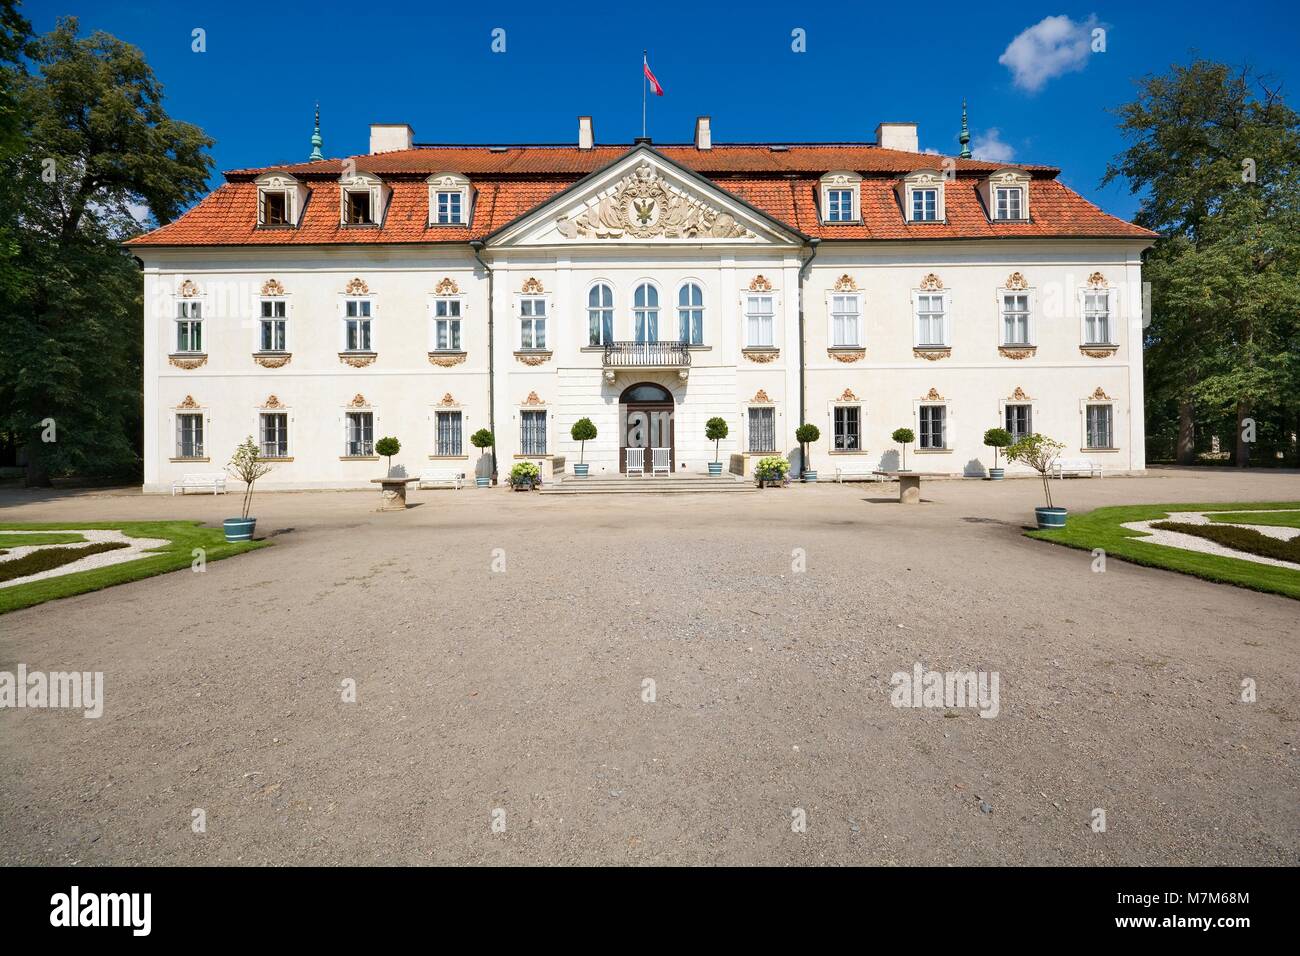 NIEBOROW, POLAND - AUGUST 20: Aristocratic Baroque palace surrounded by a French-style garden on August 20, 2016 in Nieborow, Poland Stock Photo